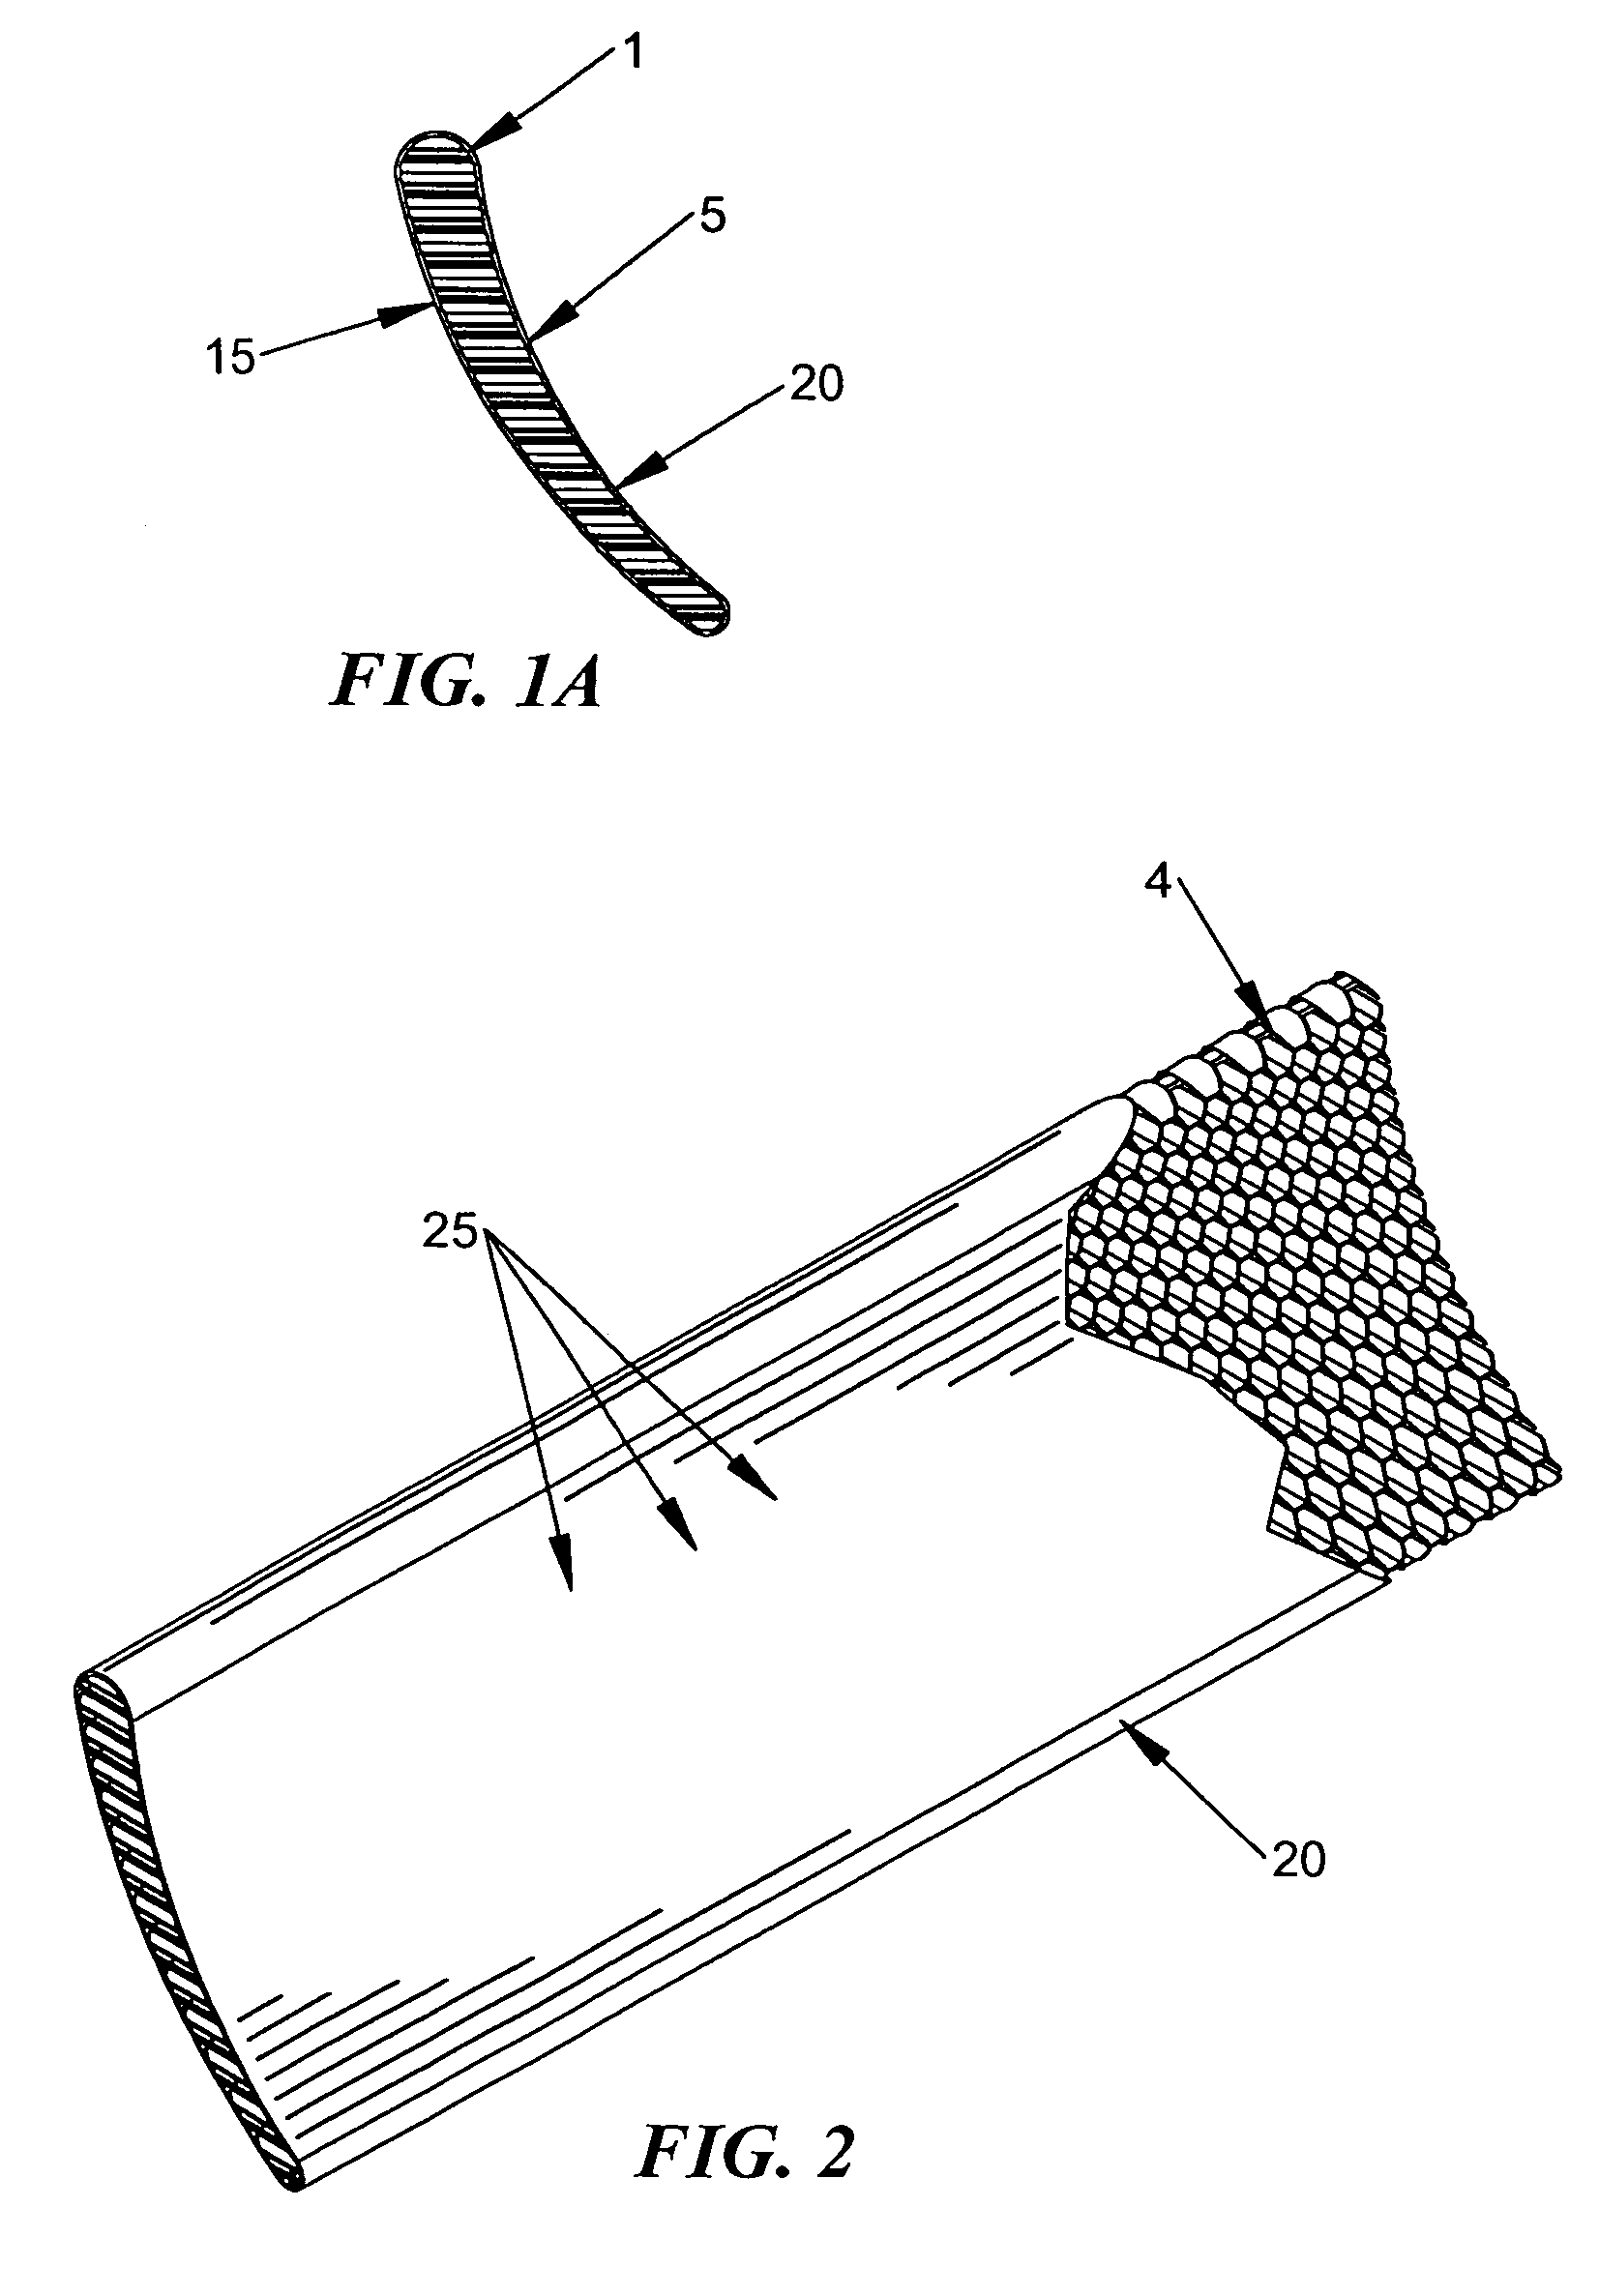 Enhanced light weight armor system with reactive properties